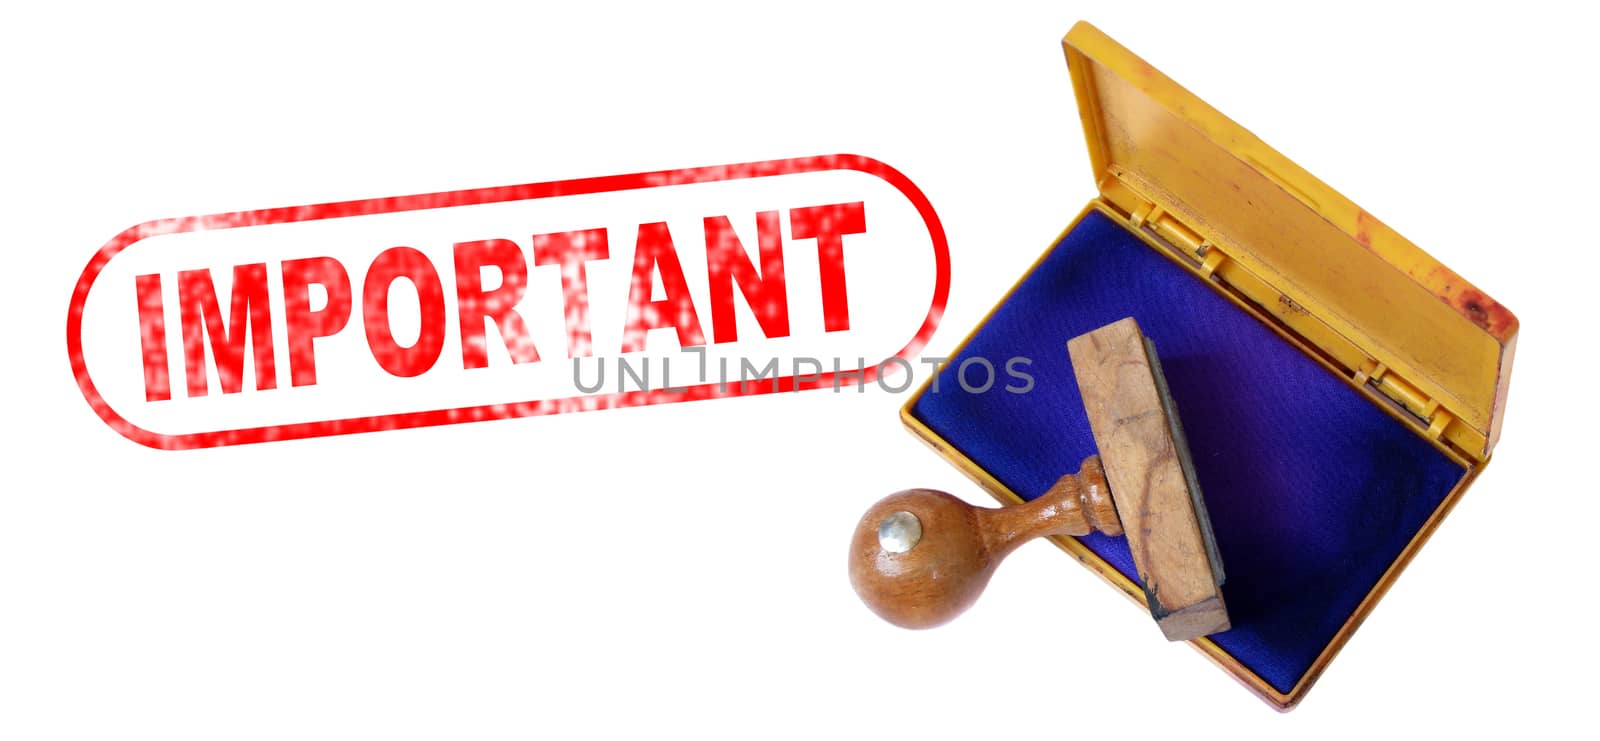 Top view of a rubber stamp with a giant word "IMPORTANT" printed, isolated on white background.